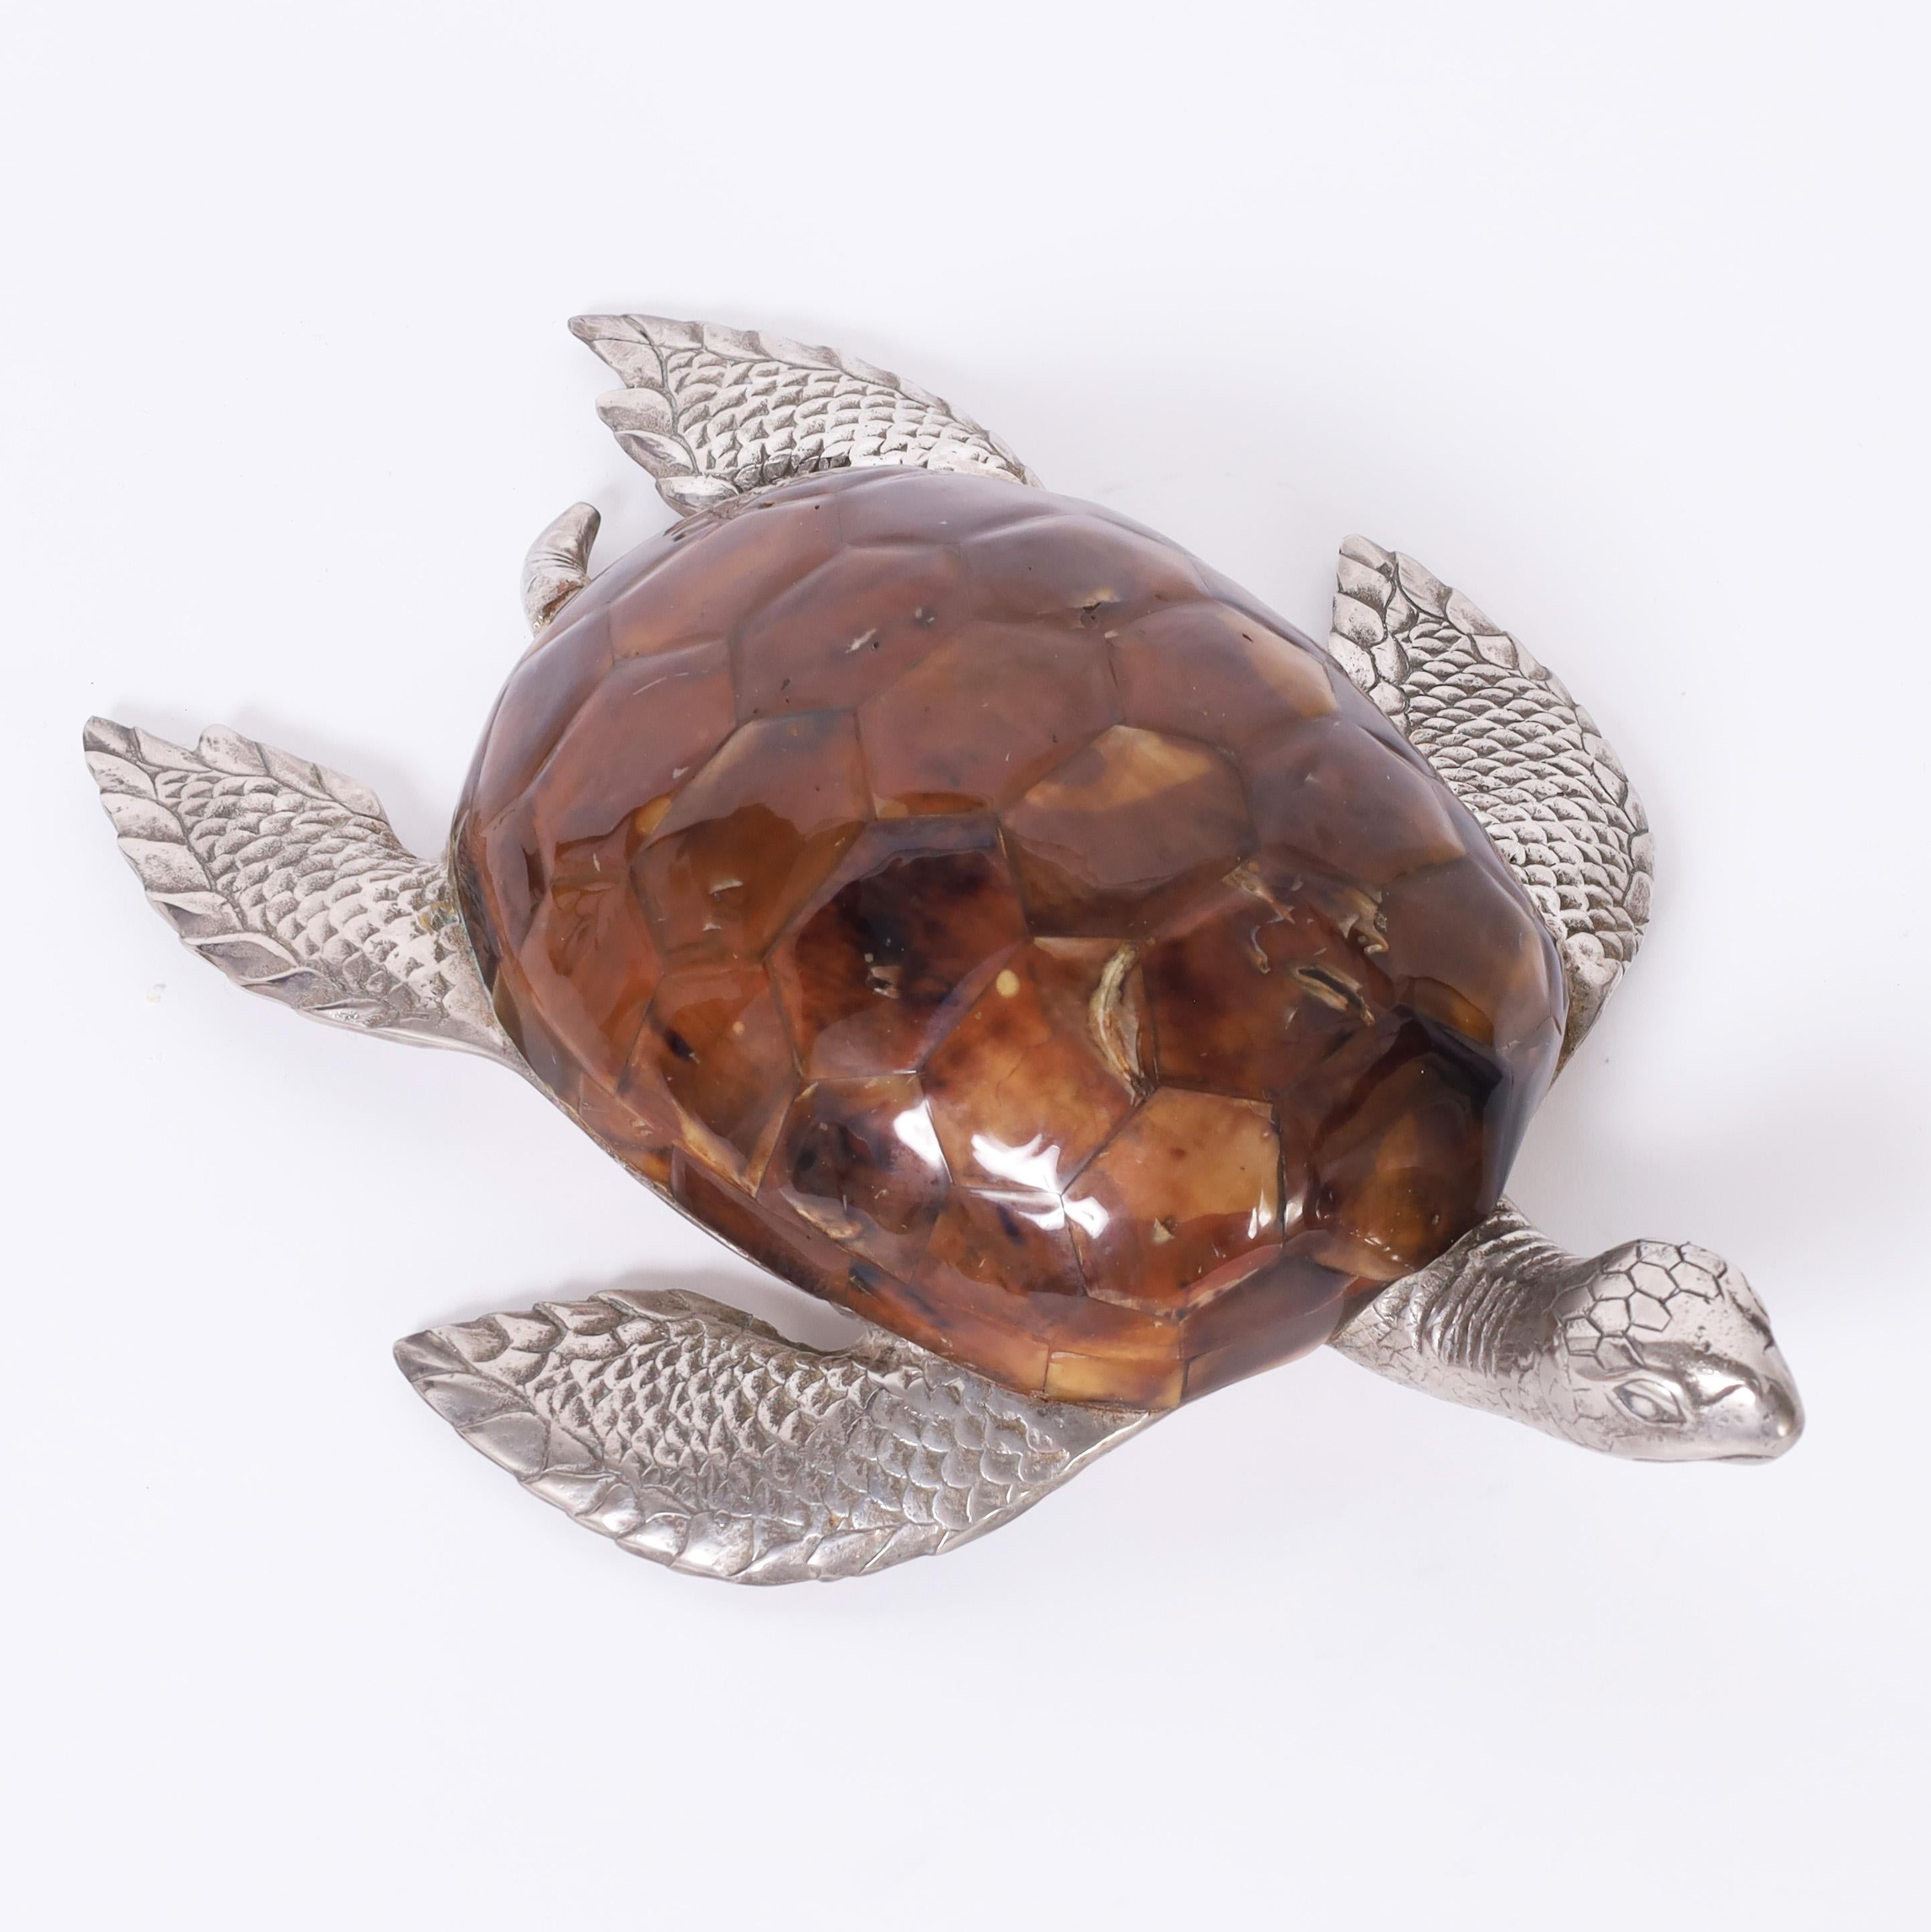 Charming vintage turtle sculpture or object of art handcrafted in silver plate over bronze with a faux tortoise shell. Signed Maitland -Smith on the bottom.